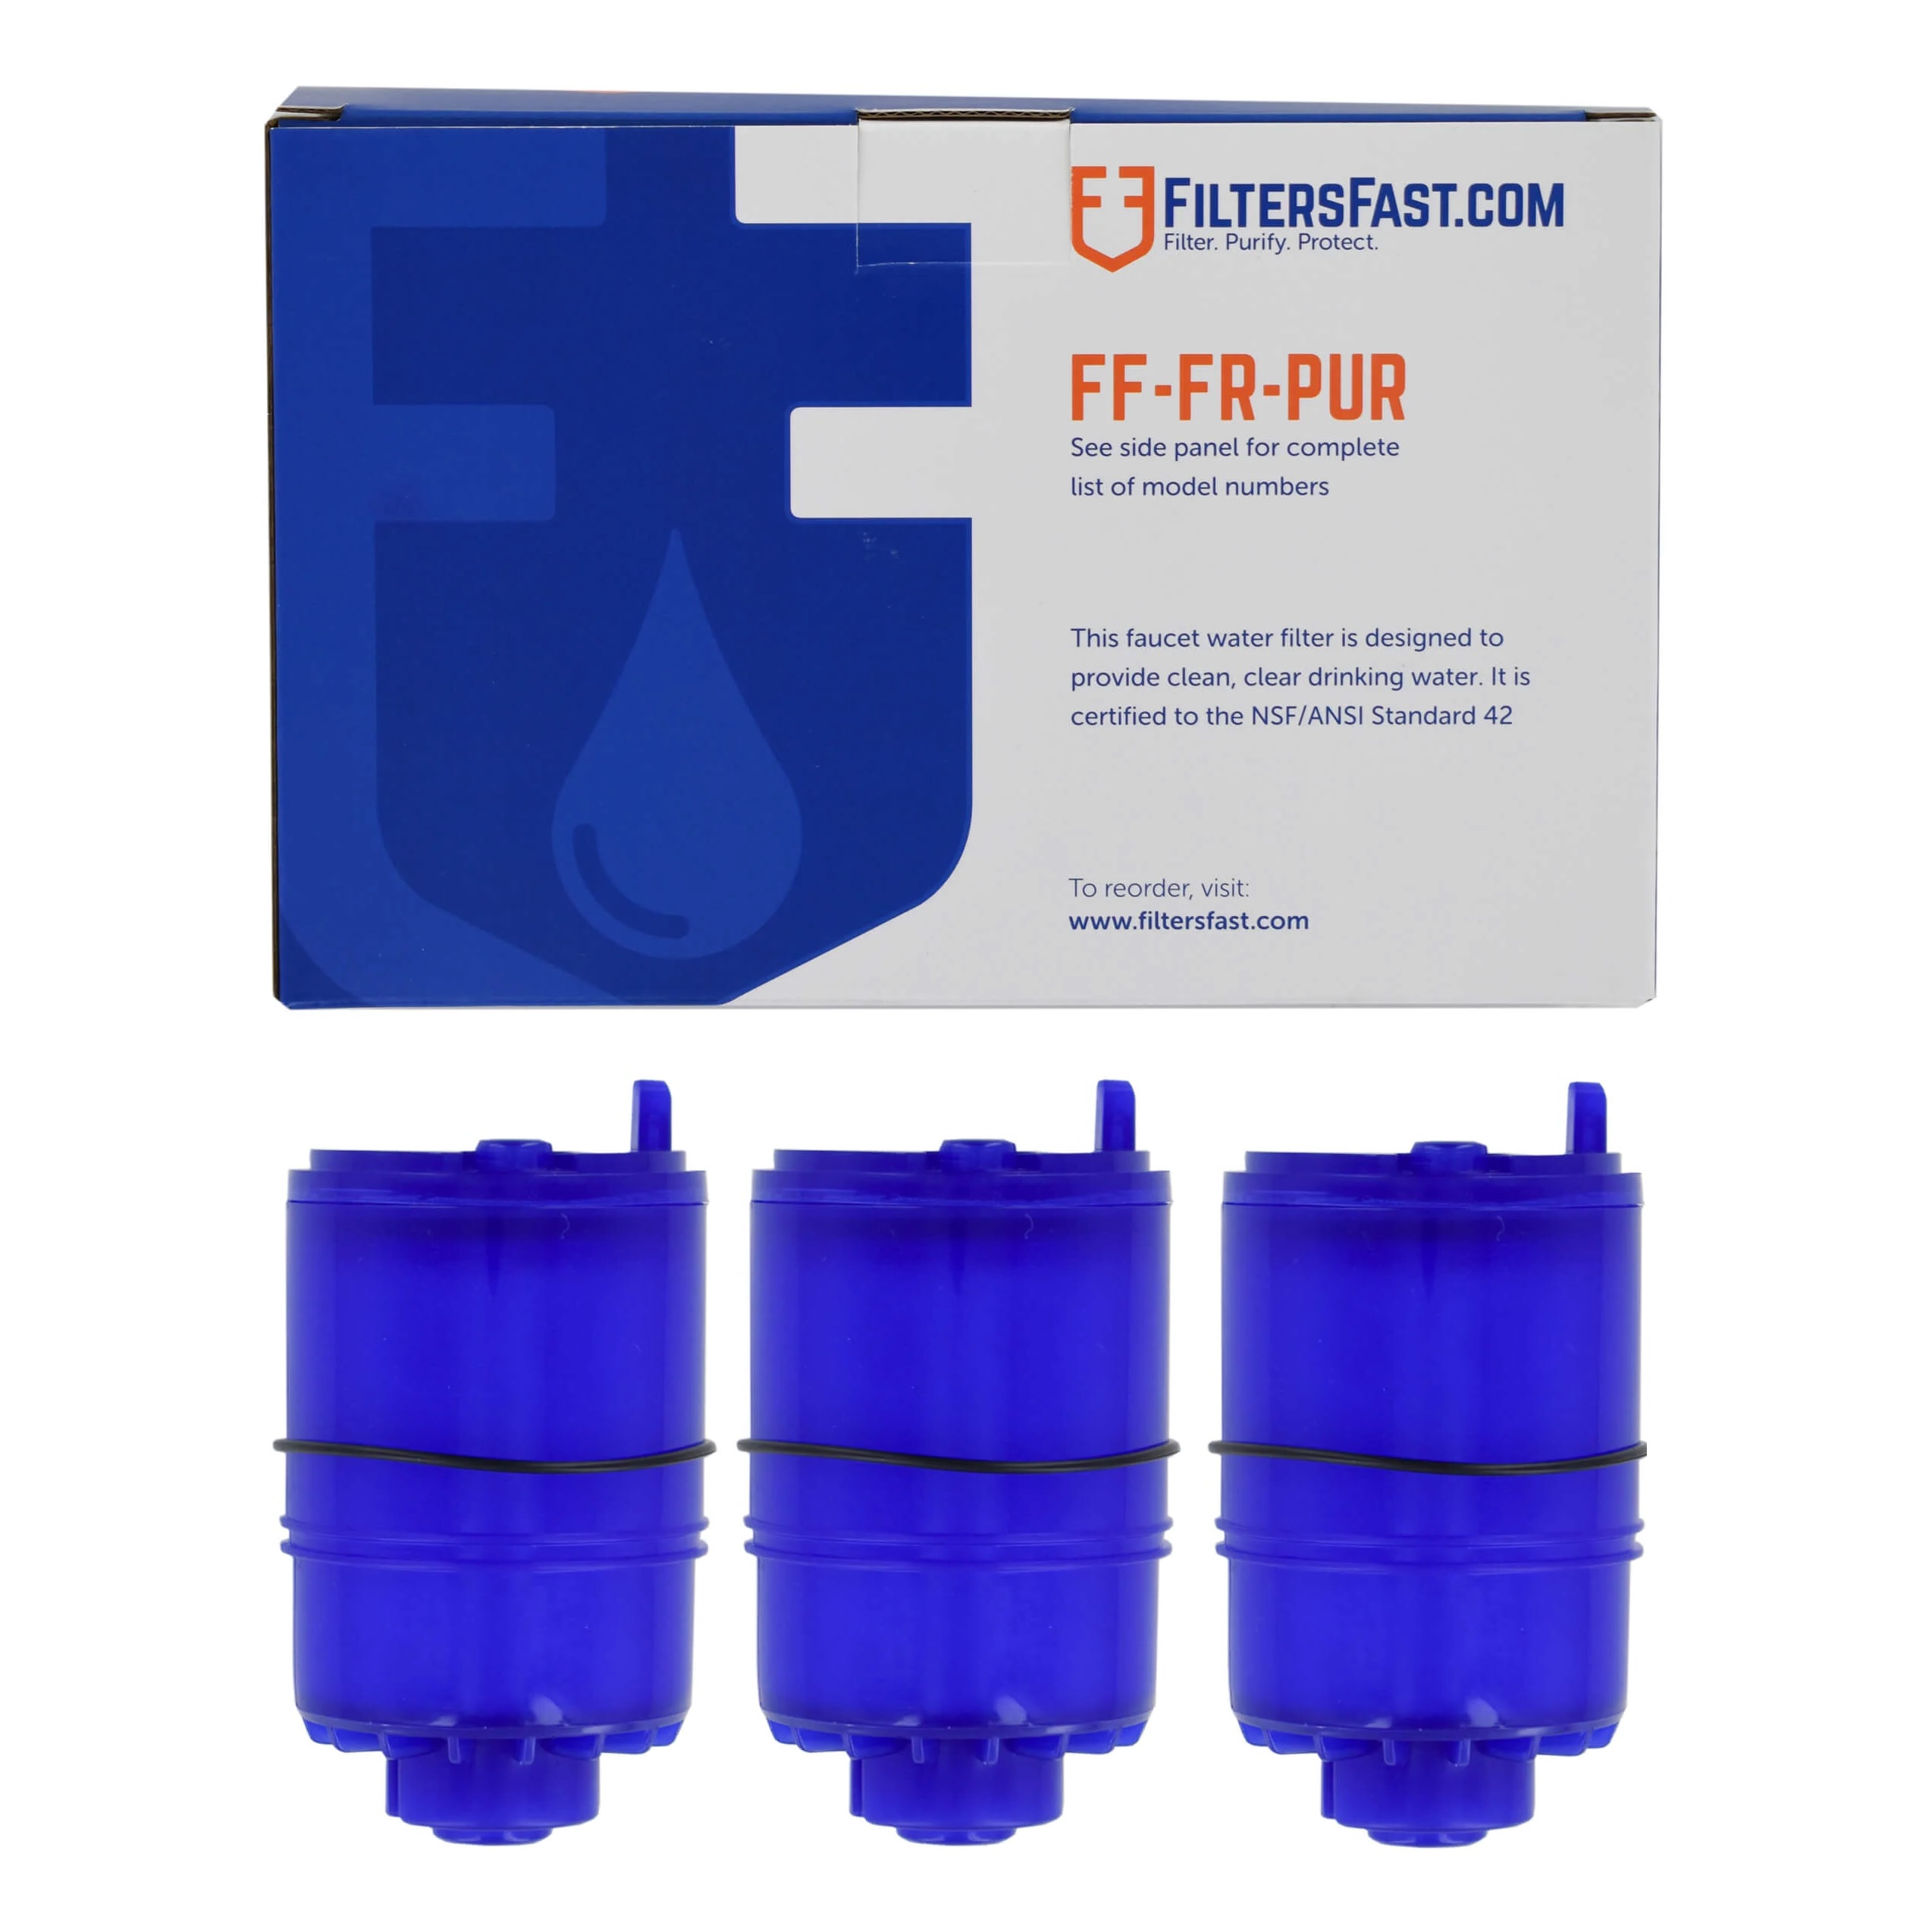 Filters Fast&reg; FF-FR-PUR Replacement Faucet Filter - 3-Pack